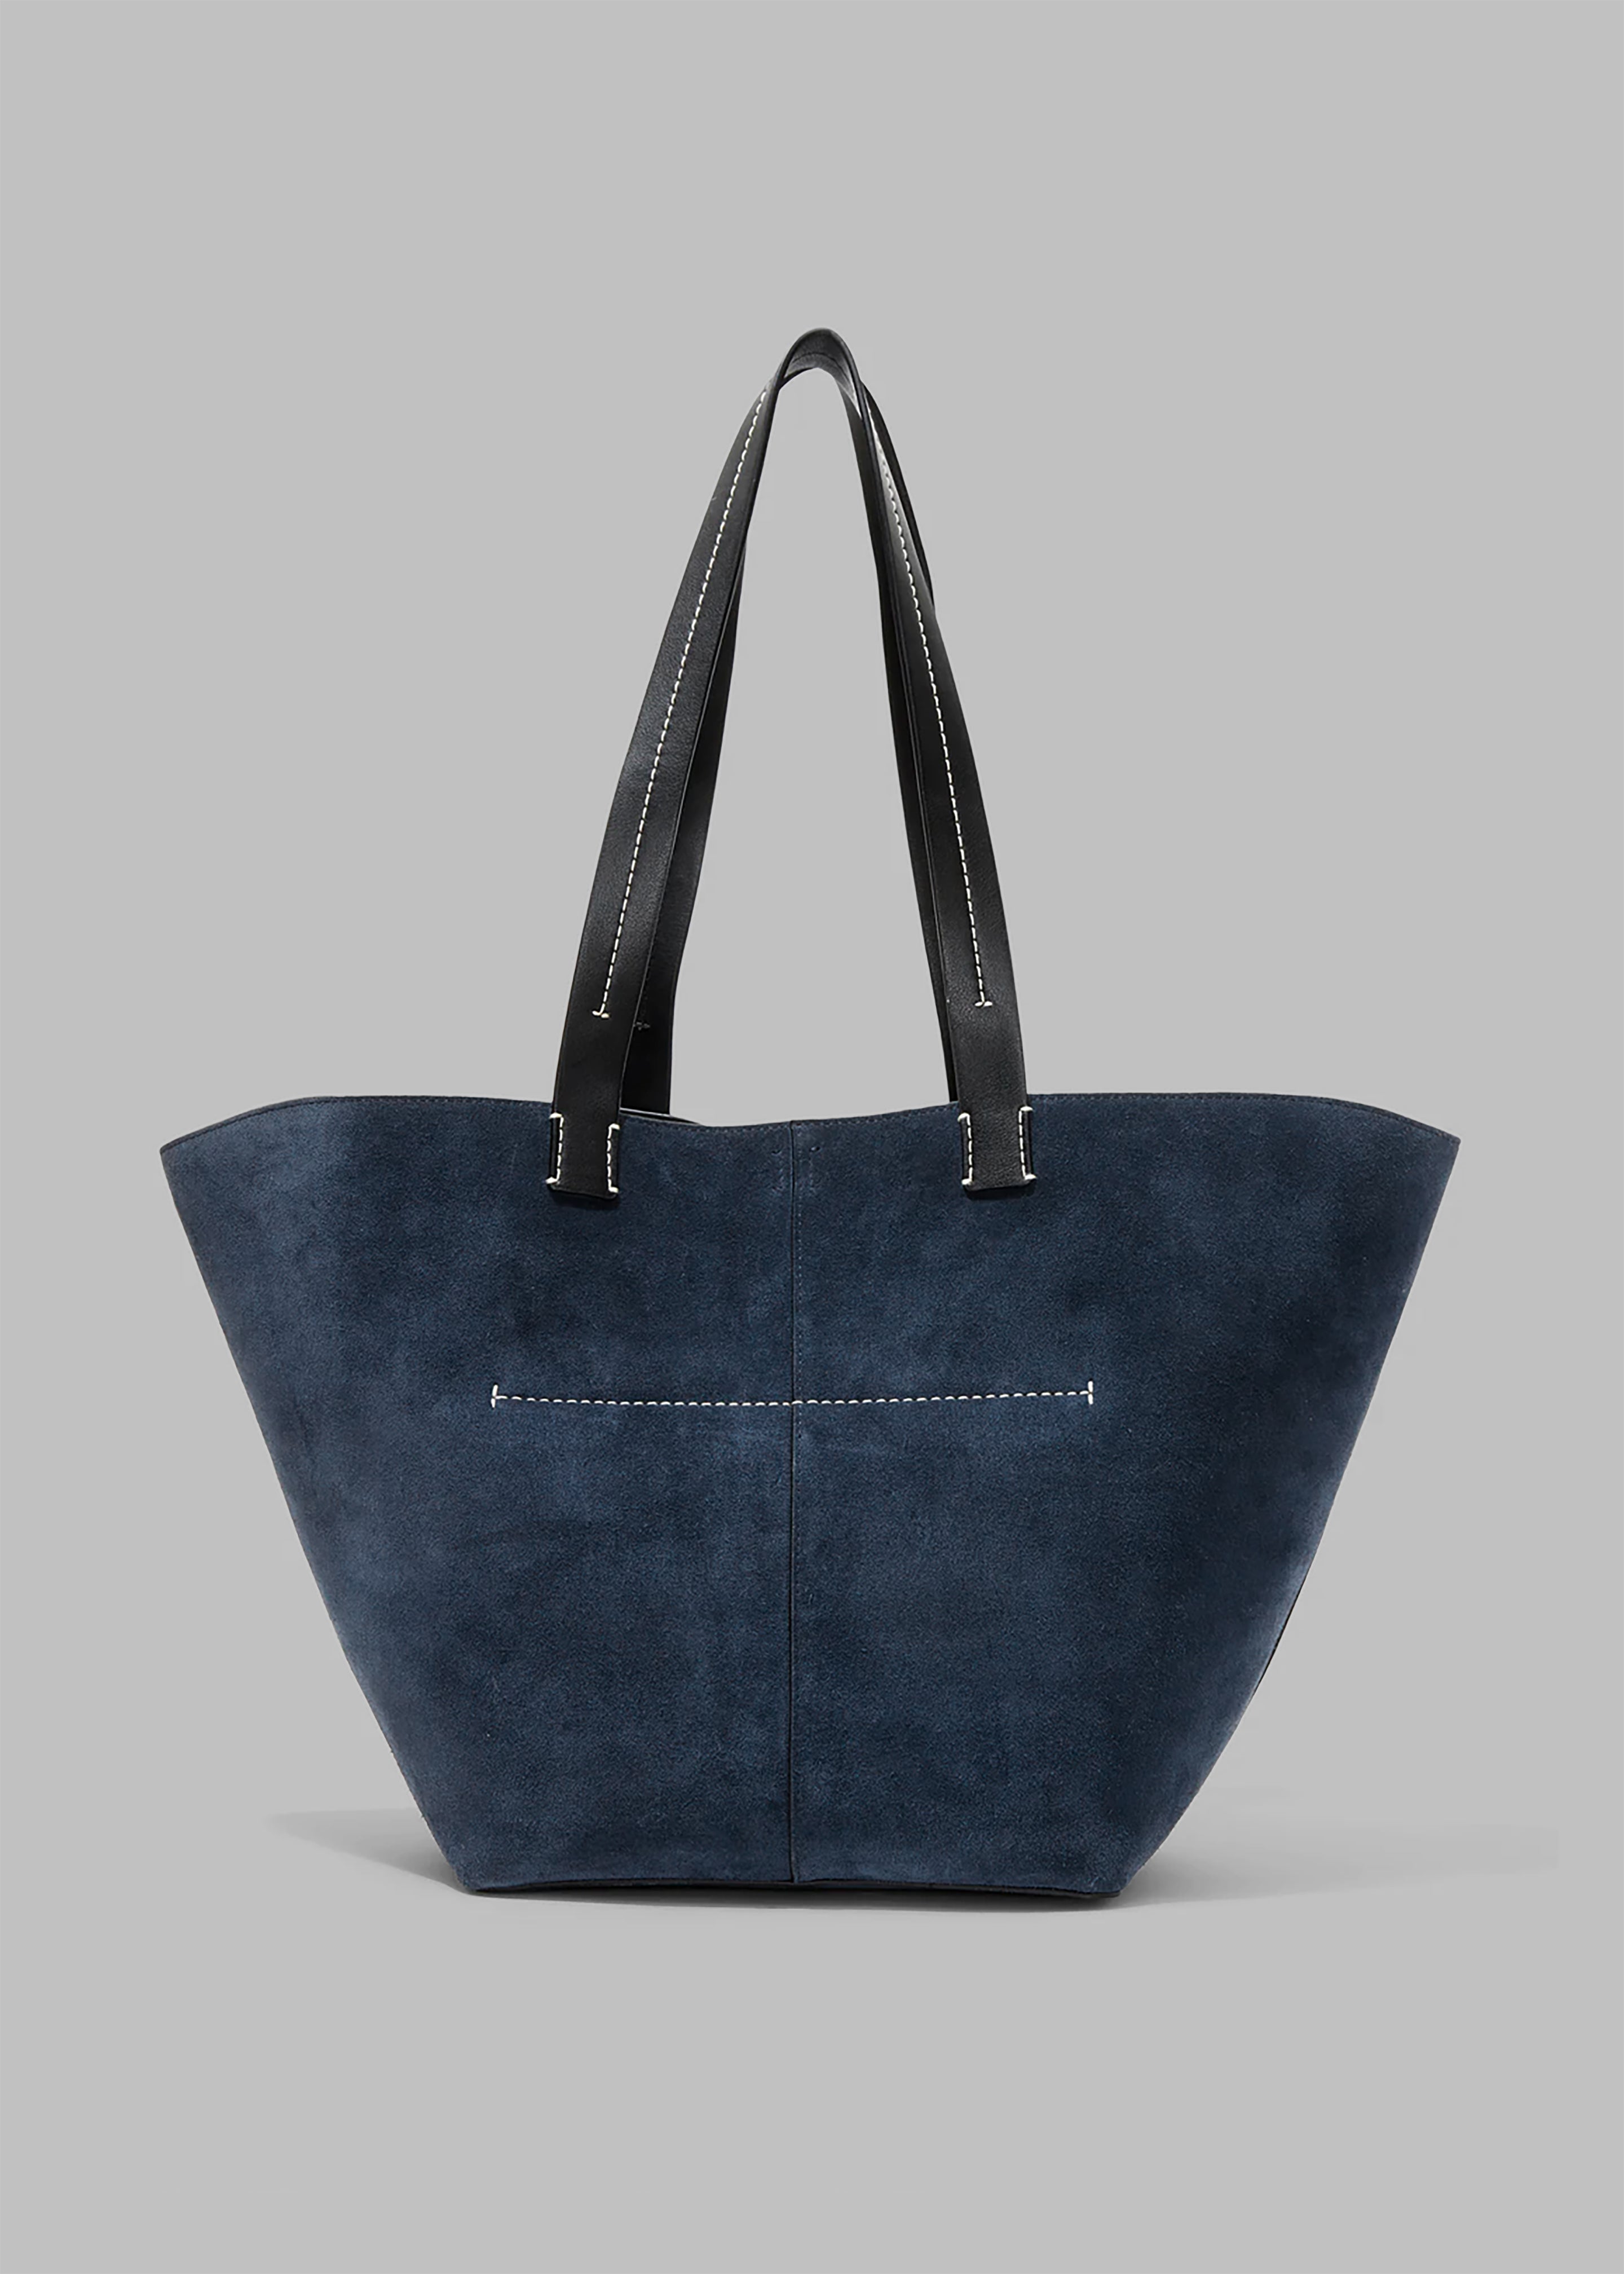 Proenza Schouler White Label Large Suede Bedford Tote - Navy/Black - 3